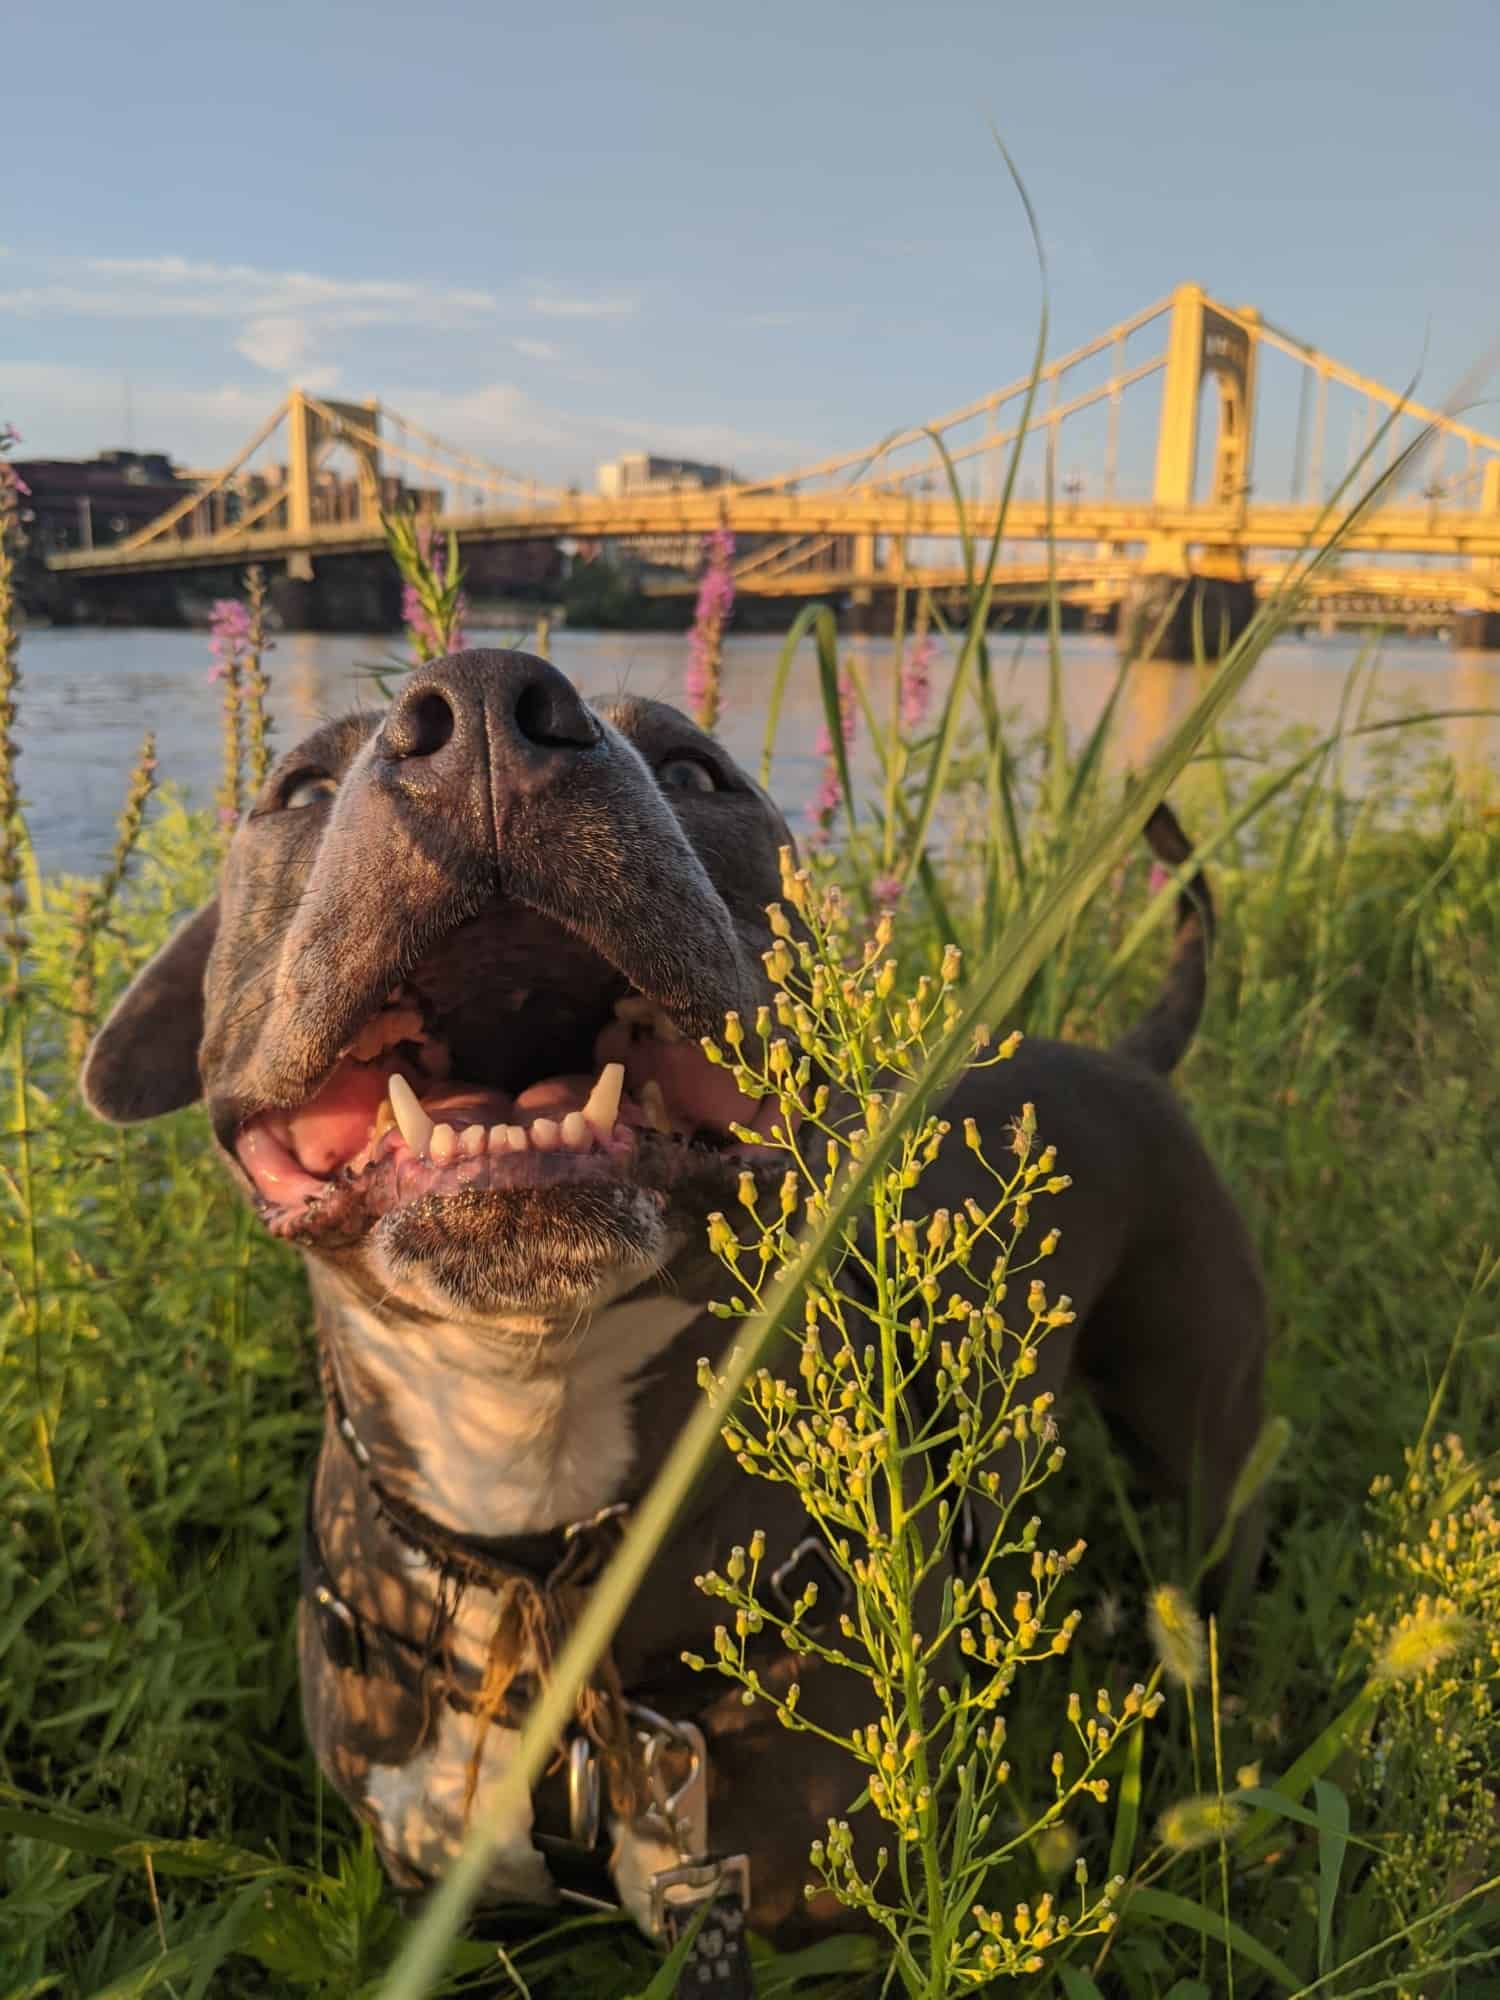 Blue pit bull with a huge smile in the grass with a bridge in the background